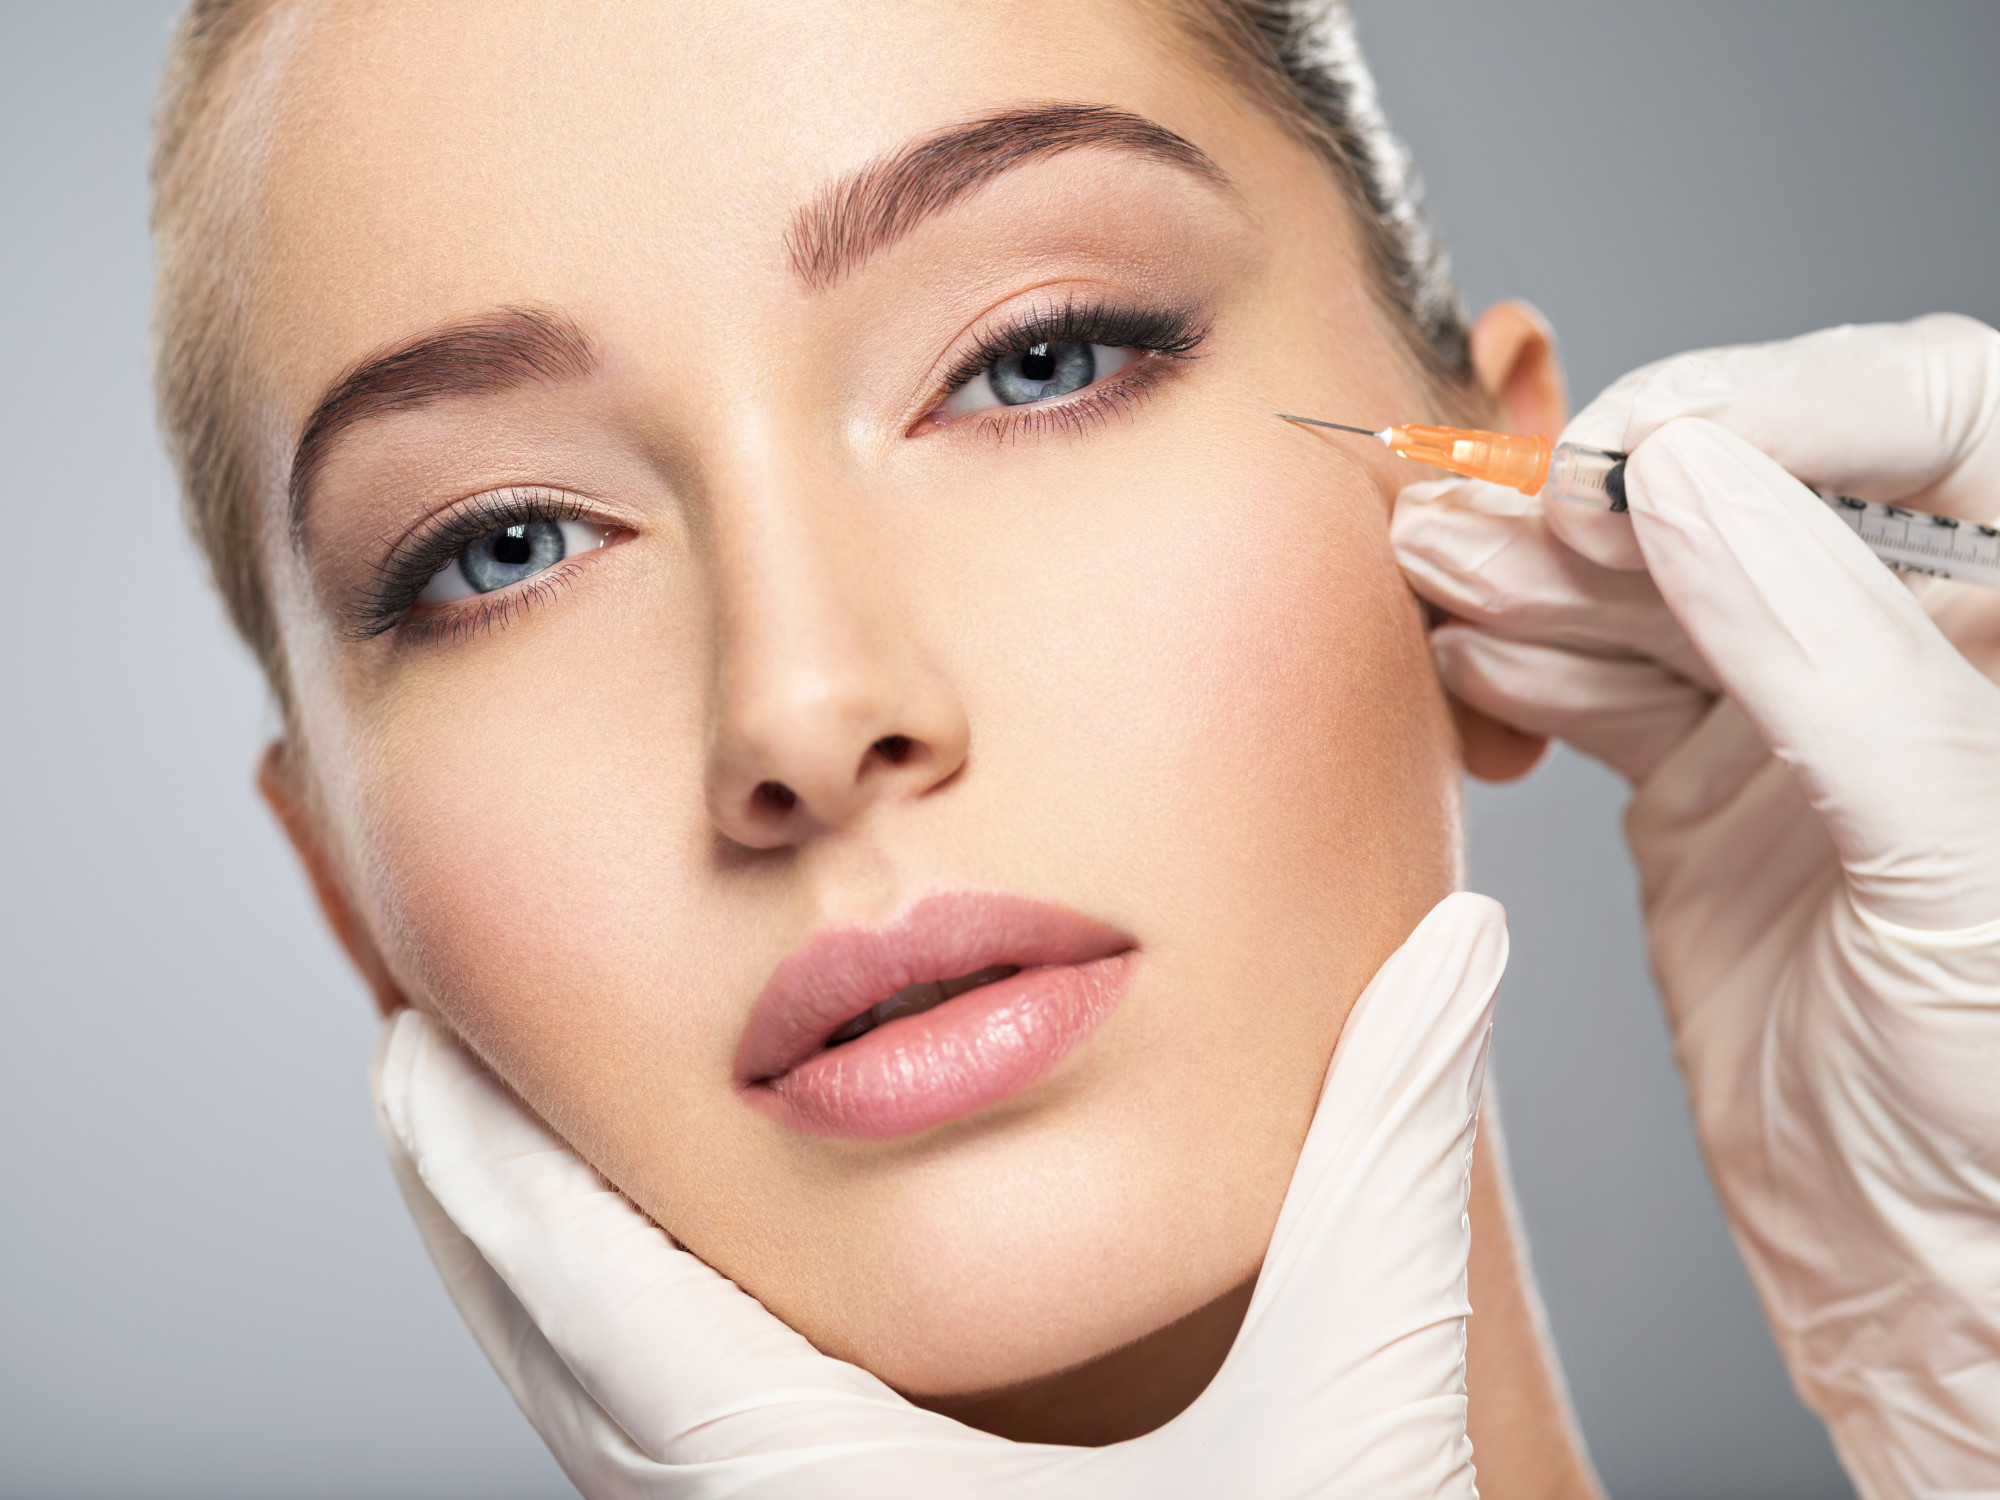 4 Interesting Plastic Surgery Procedures You Didn't Know Before